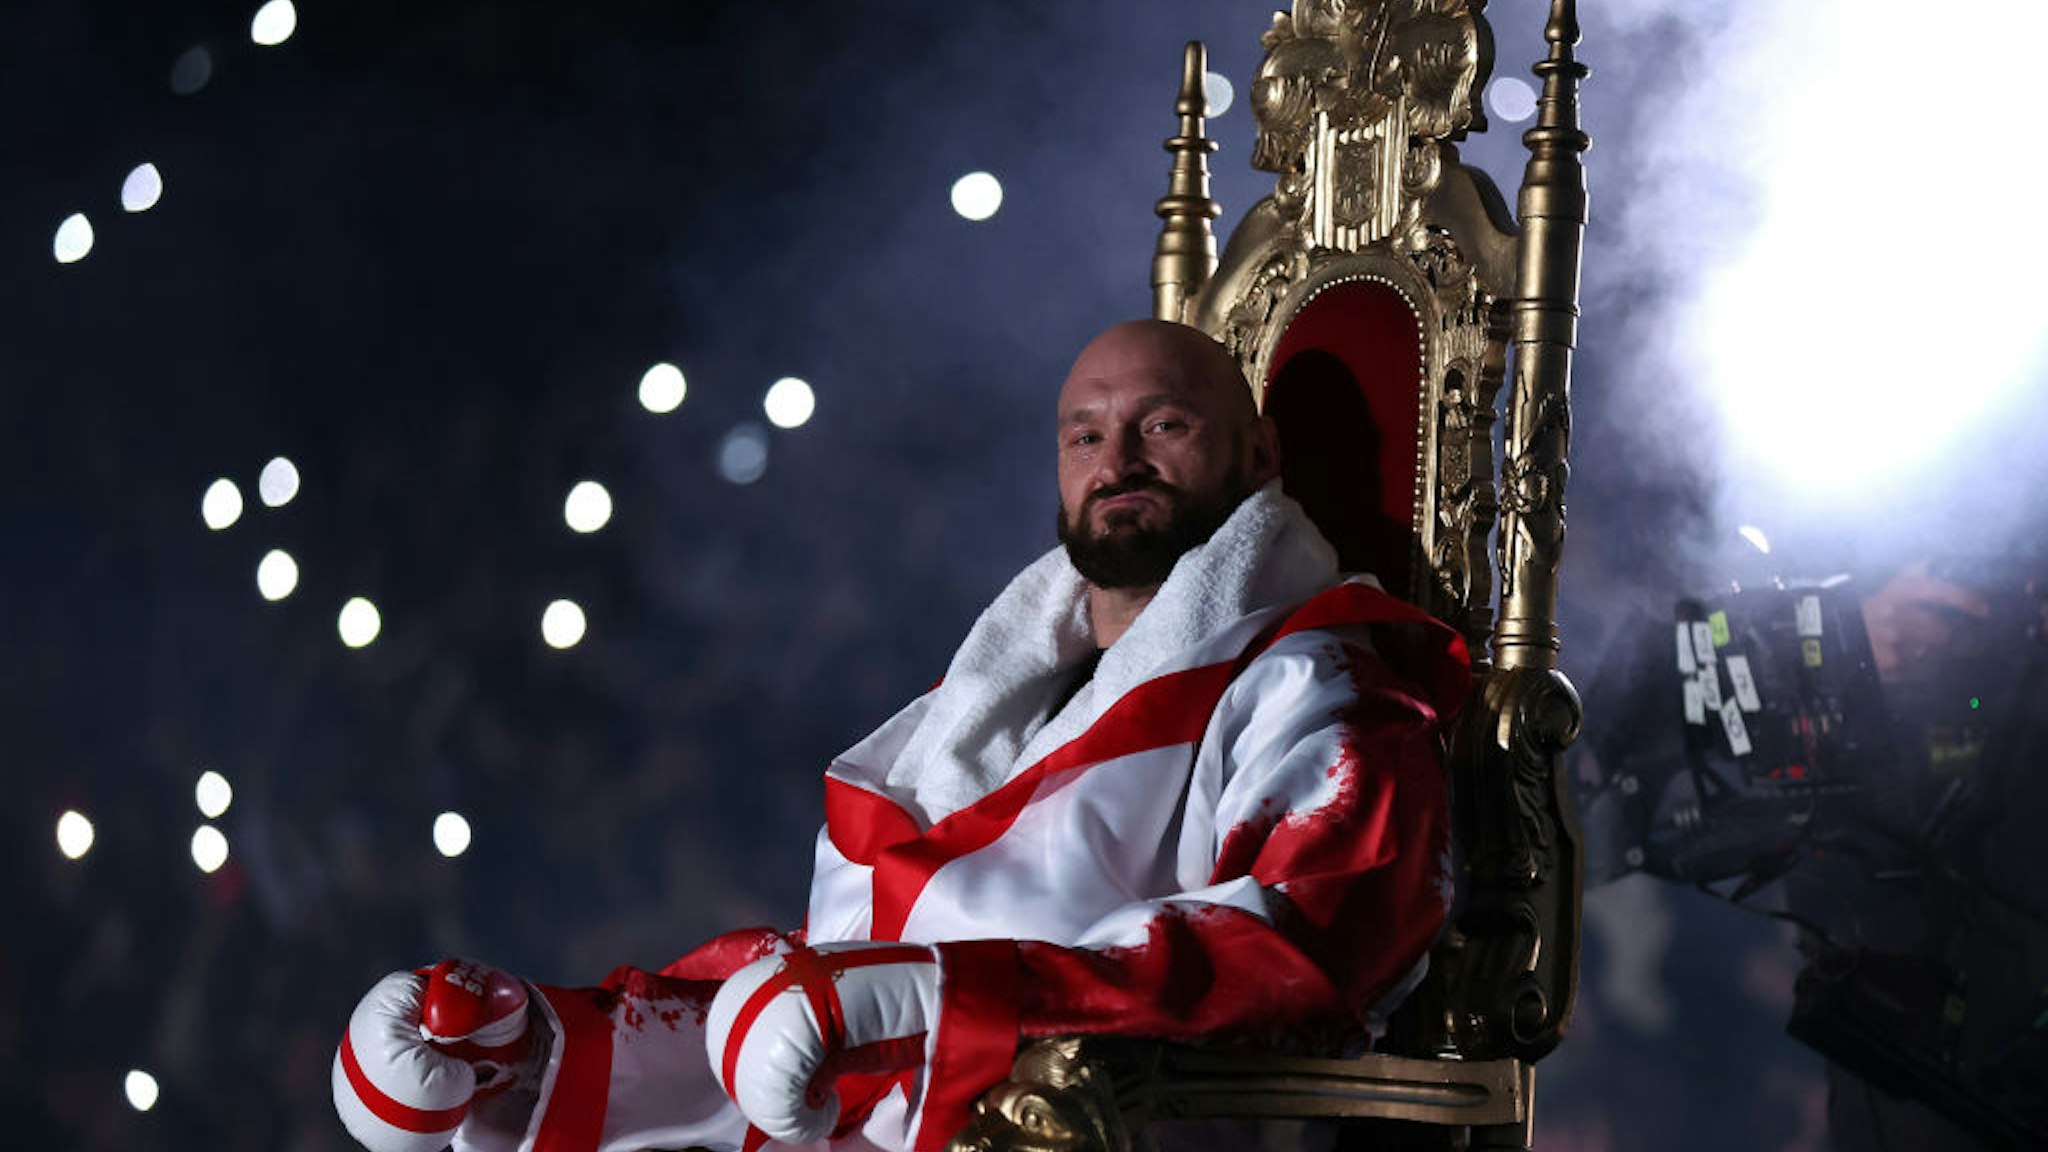 LONDON, ENGLAND - APRIL 23: Tyson Fury sits on his throne before entering the ring prior to the WBC World Heavyweight Title Fight between Tyson Fury and Dillian Whyte at Wembley Stadium on April 23, 2022 in London, England. (Photo by Julian Finney/Getty Images)